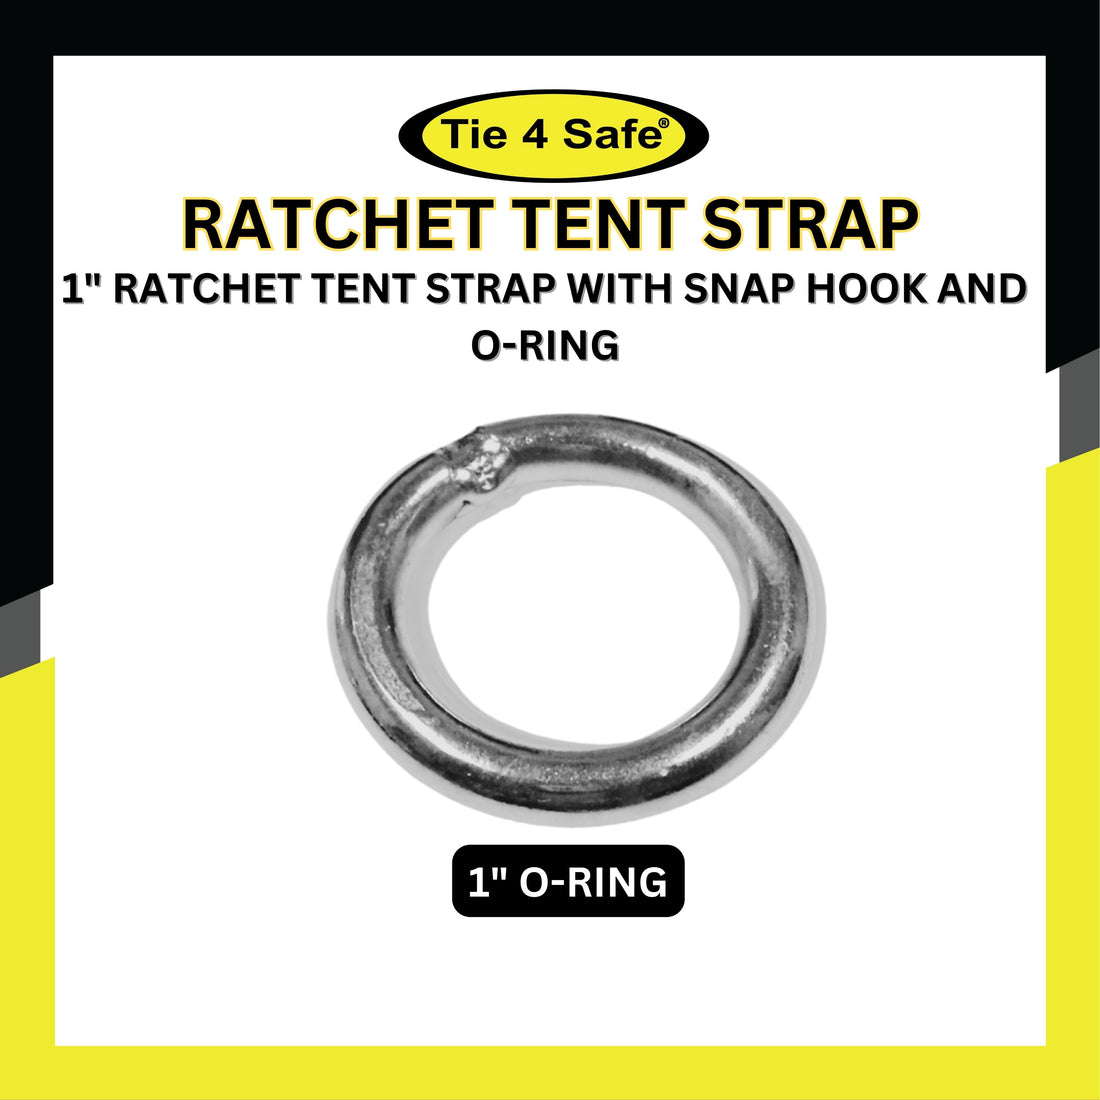 1 Inch Ratchet Buckle Tent Strap With Snap Hook And O-Ring